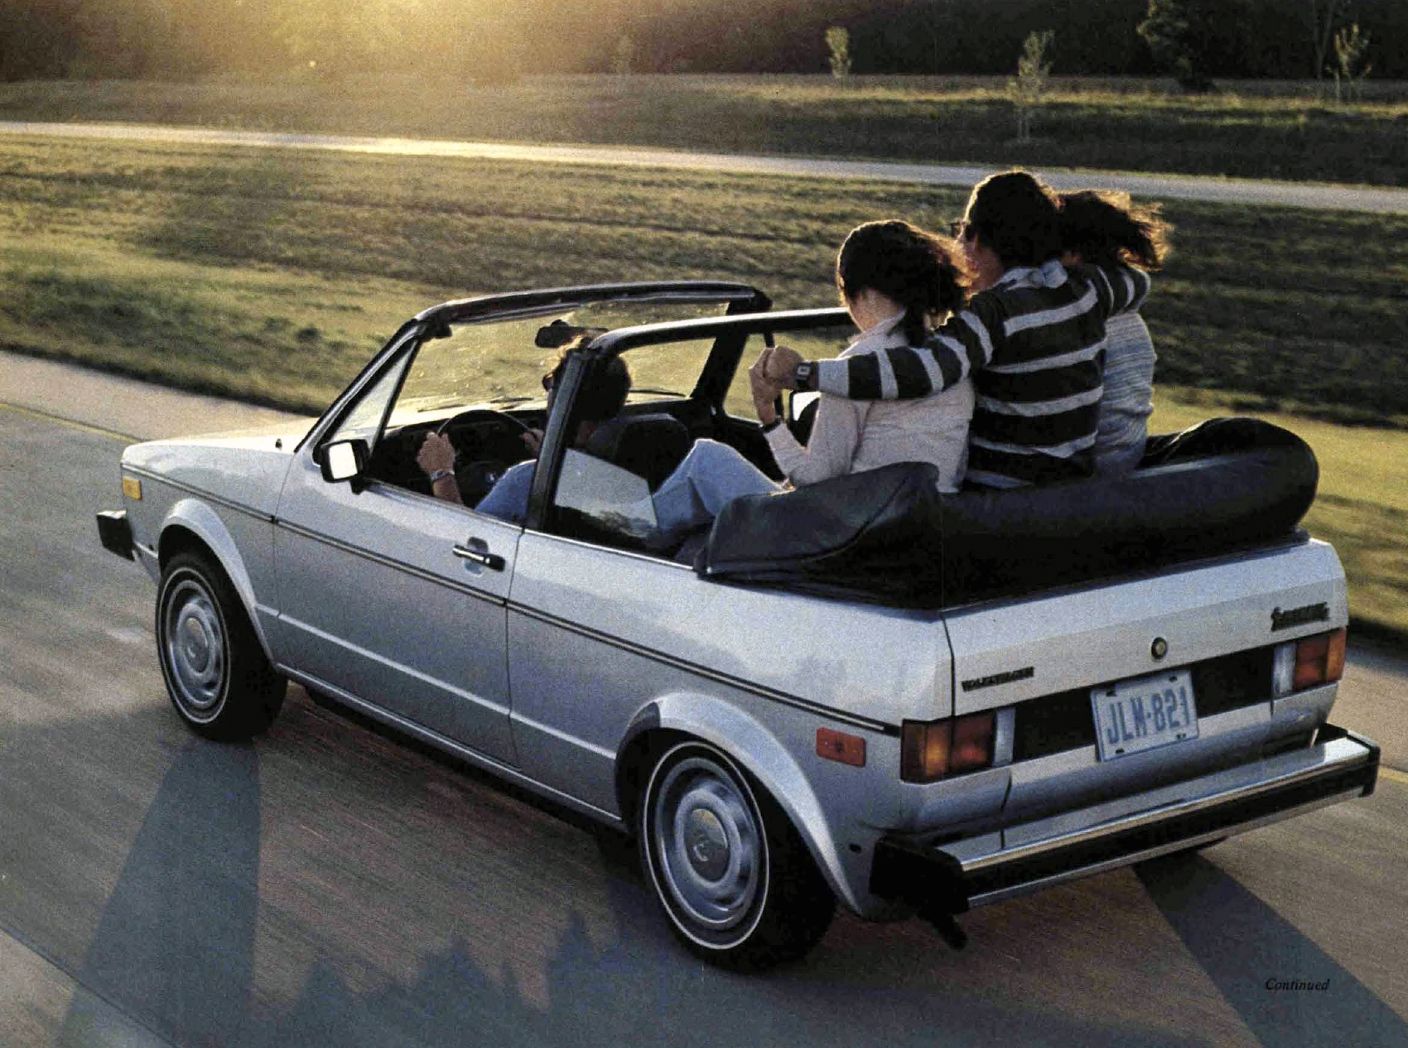 1980 Volkswagen Rabbit Convertible Tested: A Happy Little Car